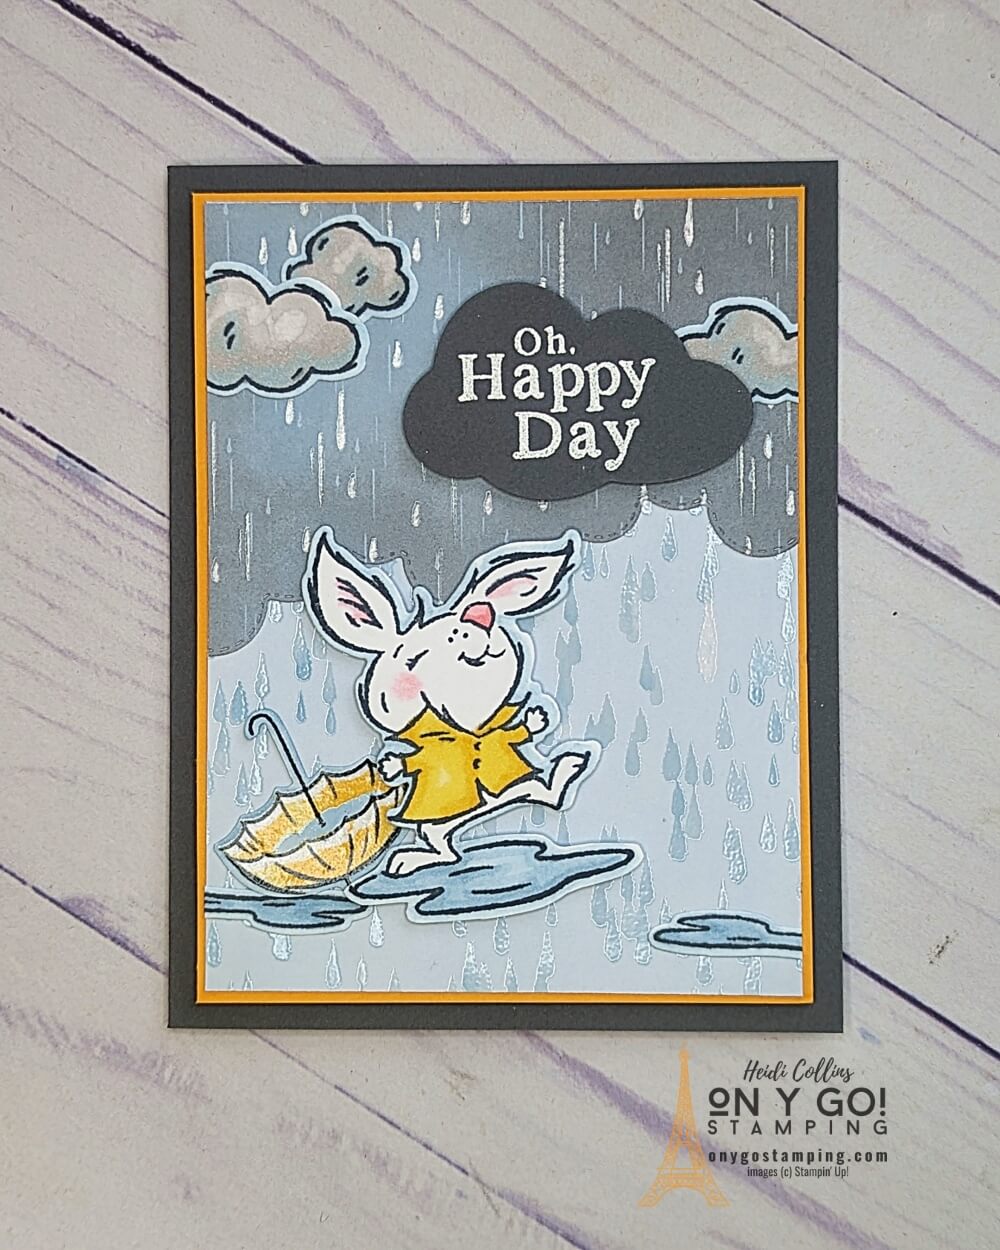 When the sky turns gray and the clouds start to pour, it's time to bring out the Playing in the Rain stamp set from Stampin' Up! Accompanied by the cheerful Rain or Shine patterned paper, your handmade cards will be perfect for uplifting your friends and family during the wetter days!